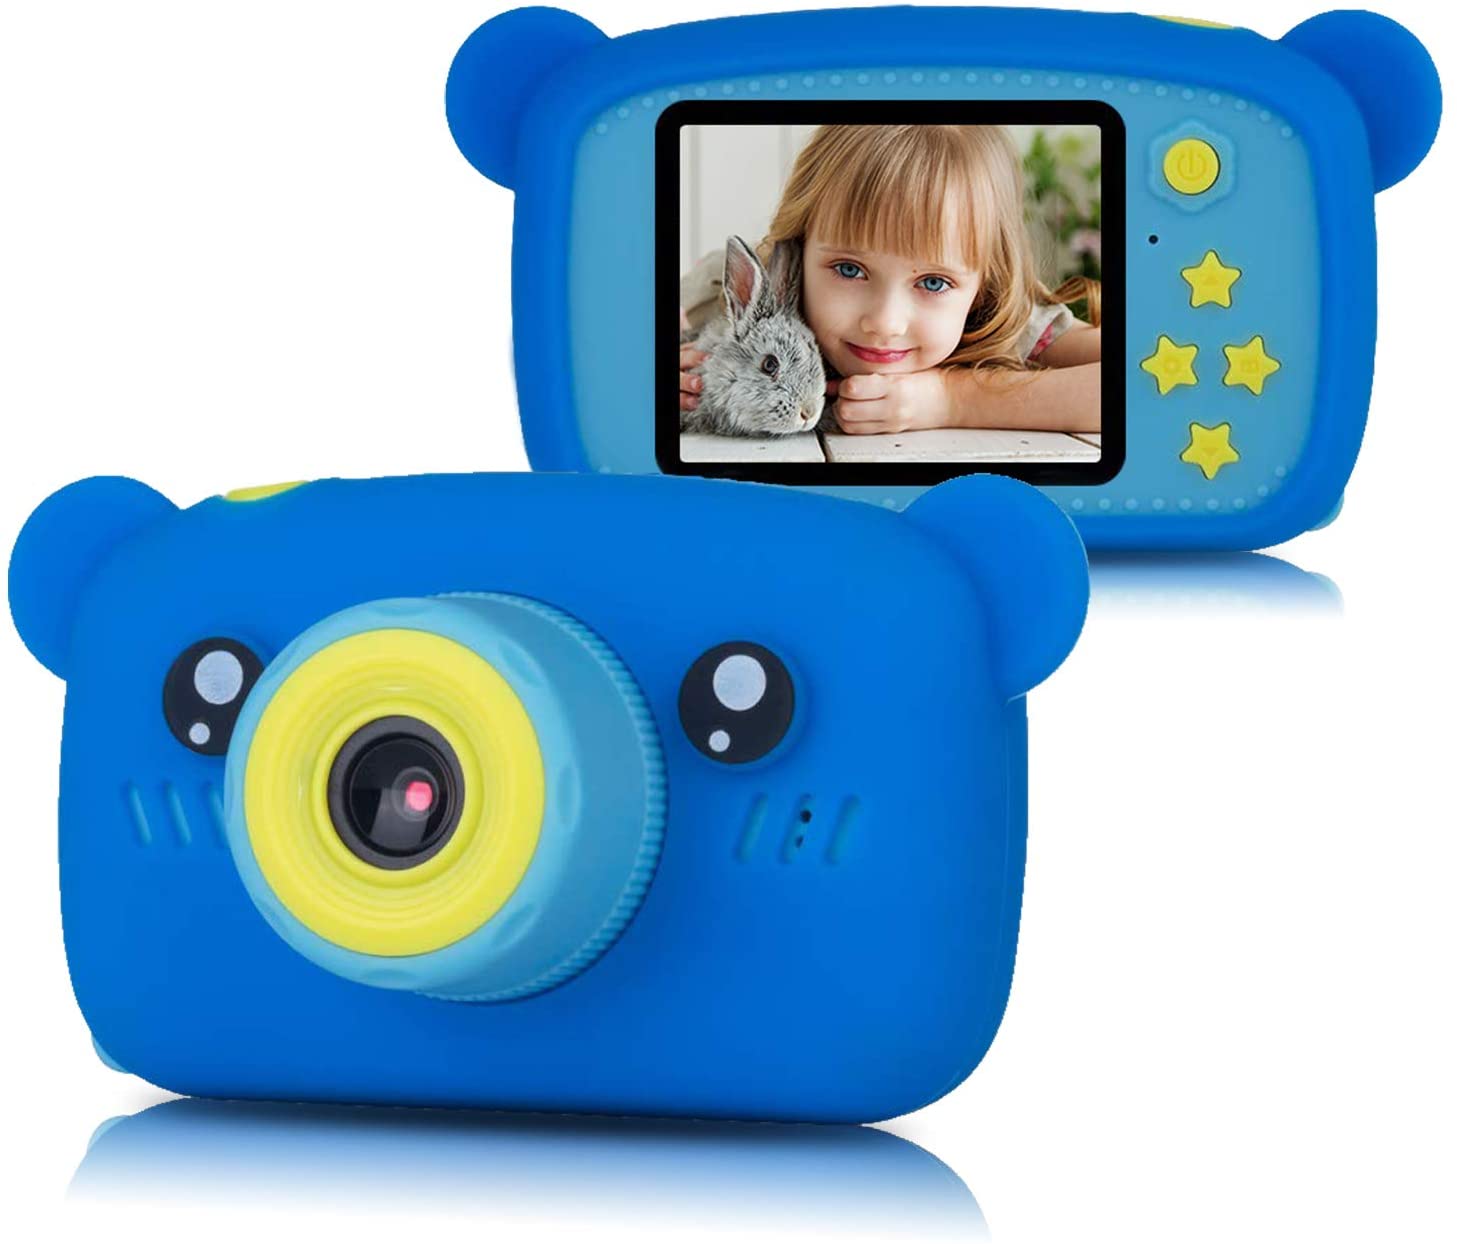 HD 1080P Digital Camera with VIDEO Recorder Camcorder and GAMEs Toys for Children (Blue Bear)